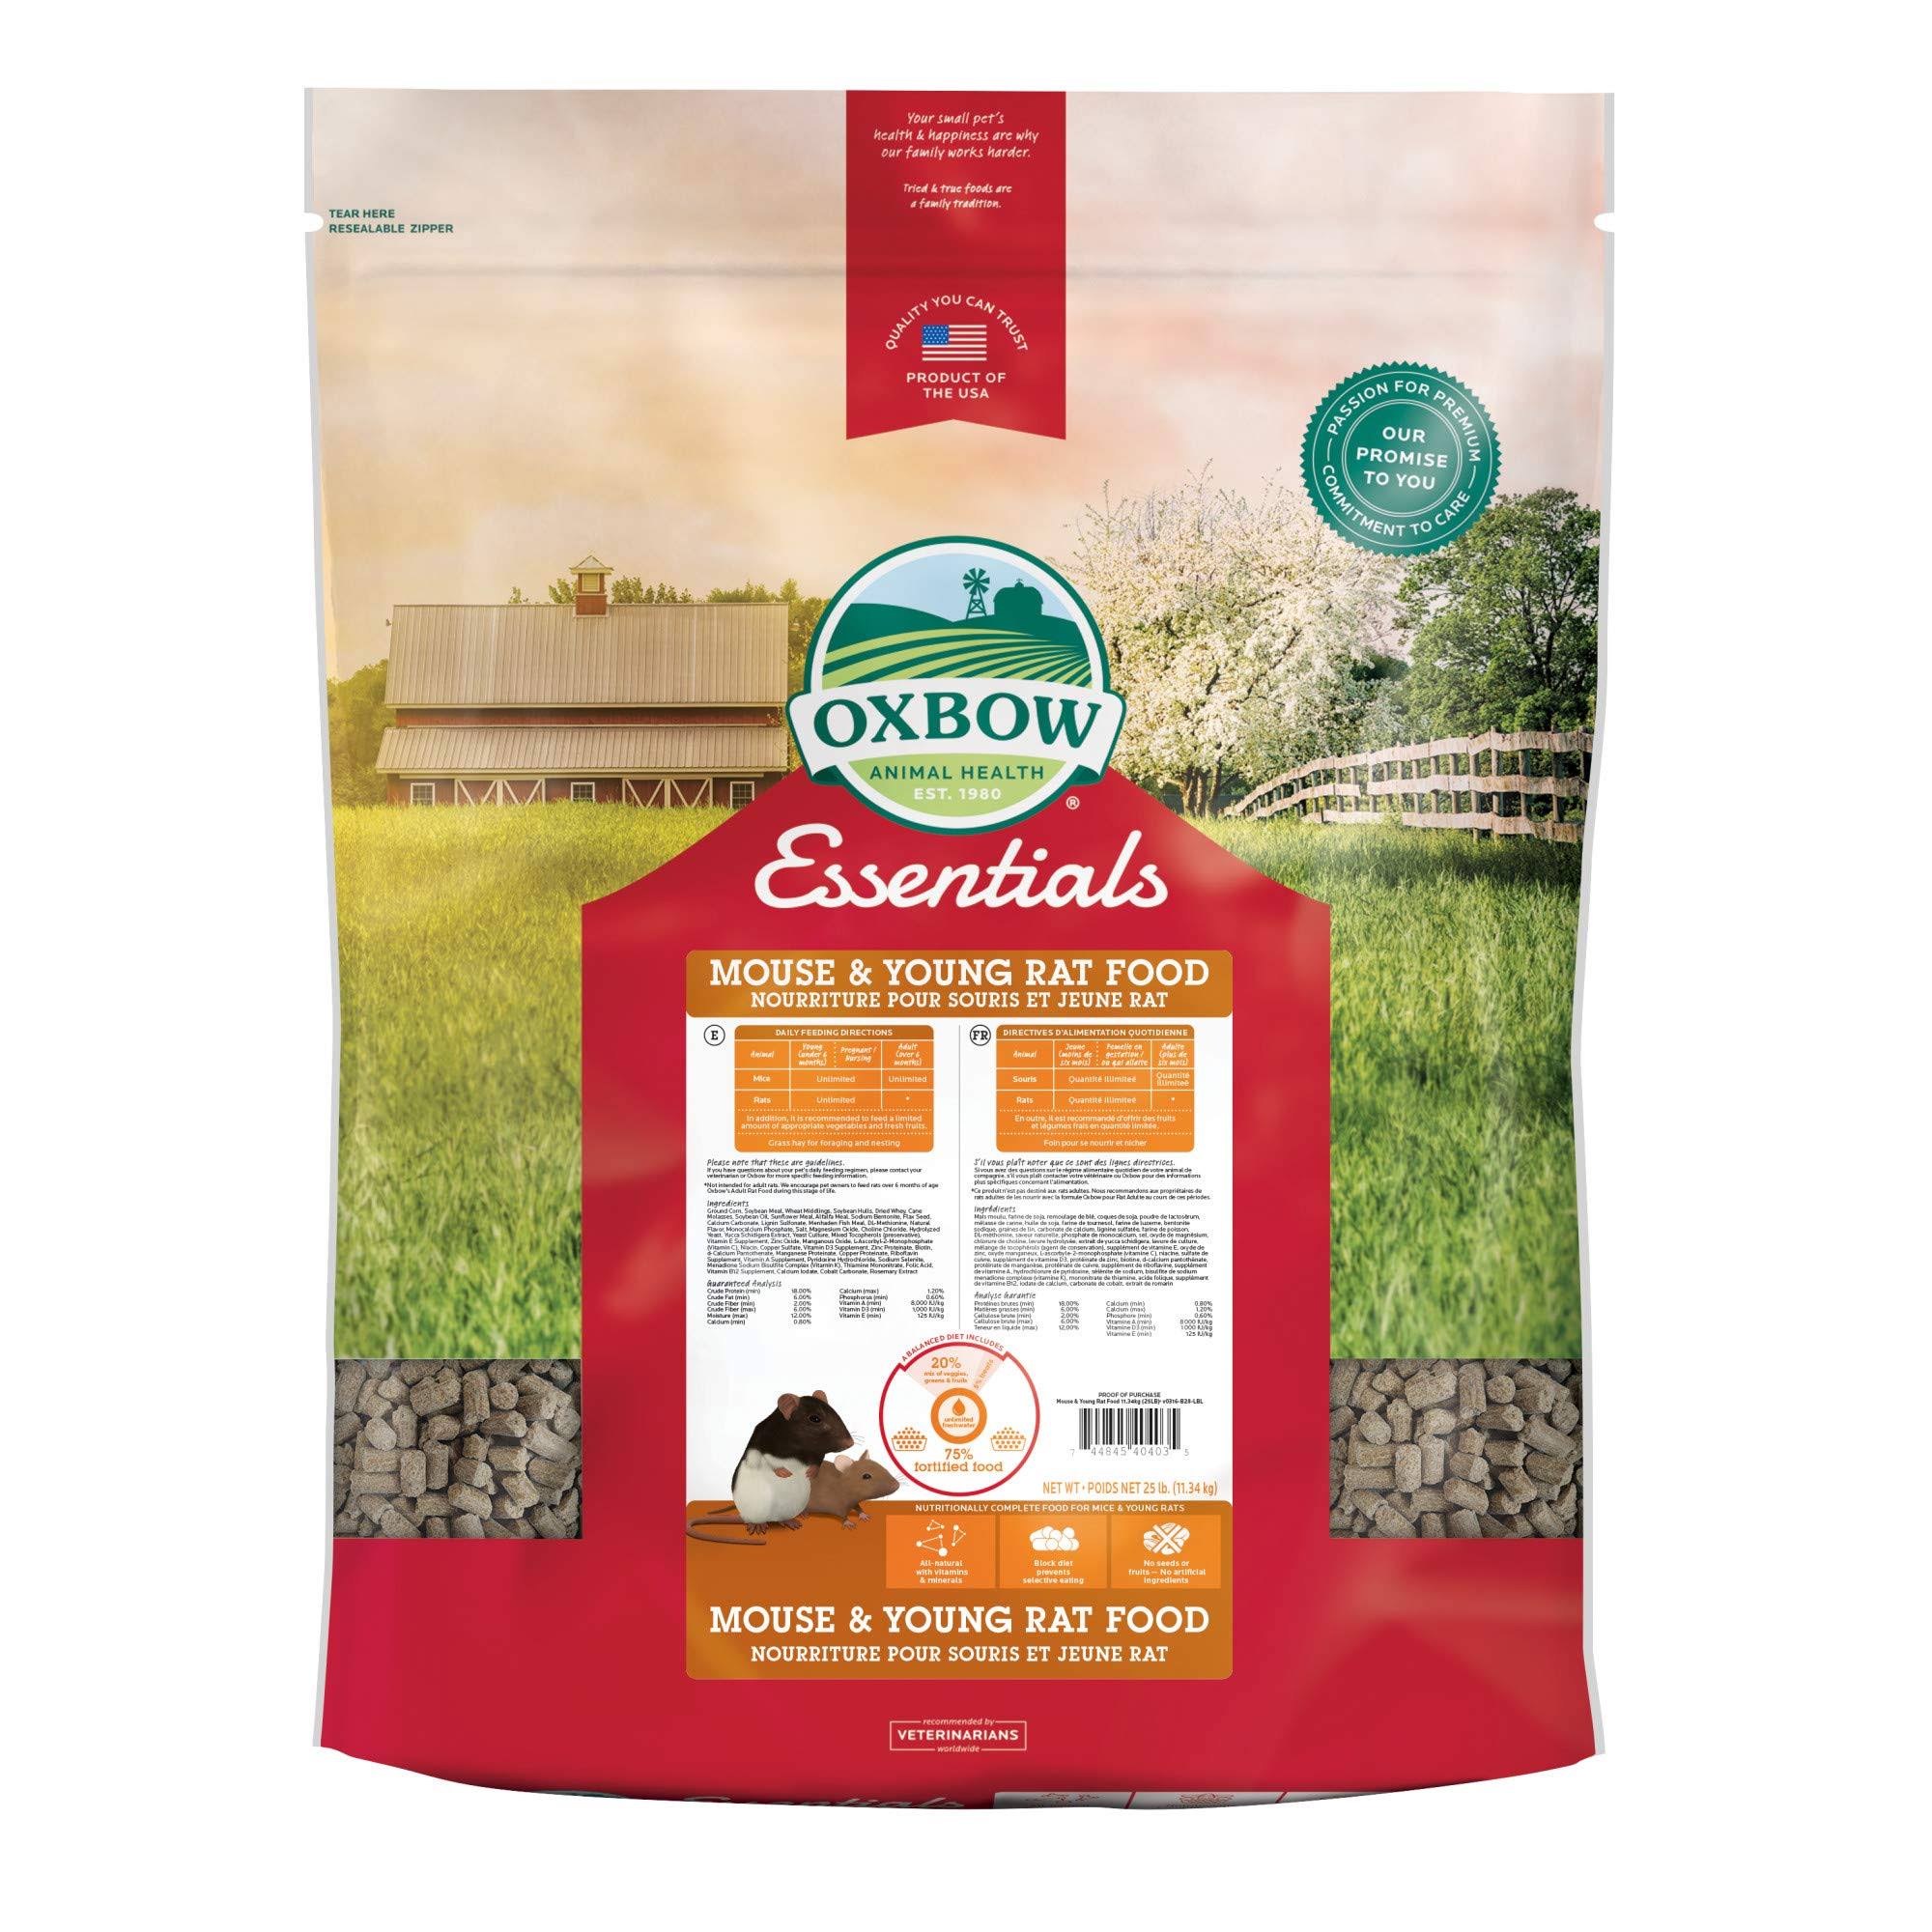 Oxbow Animal Health Essentials Mouse Young Rat Food - 25lbs